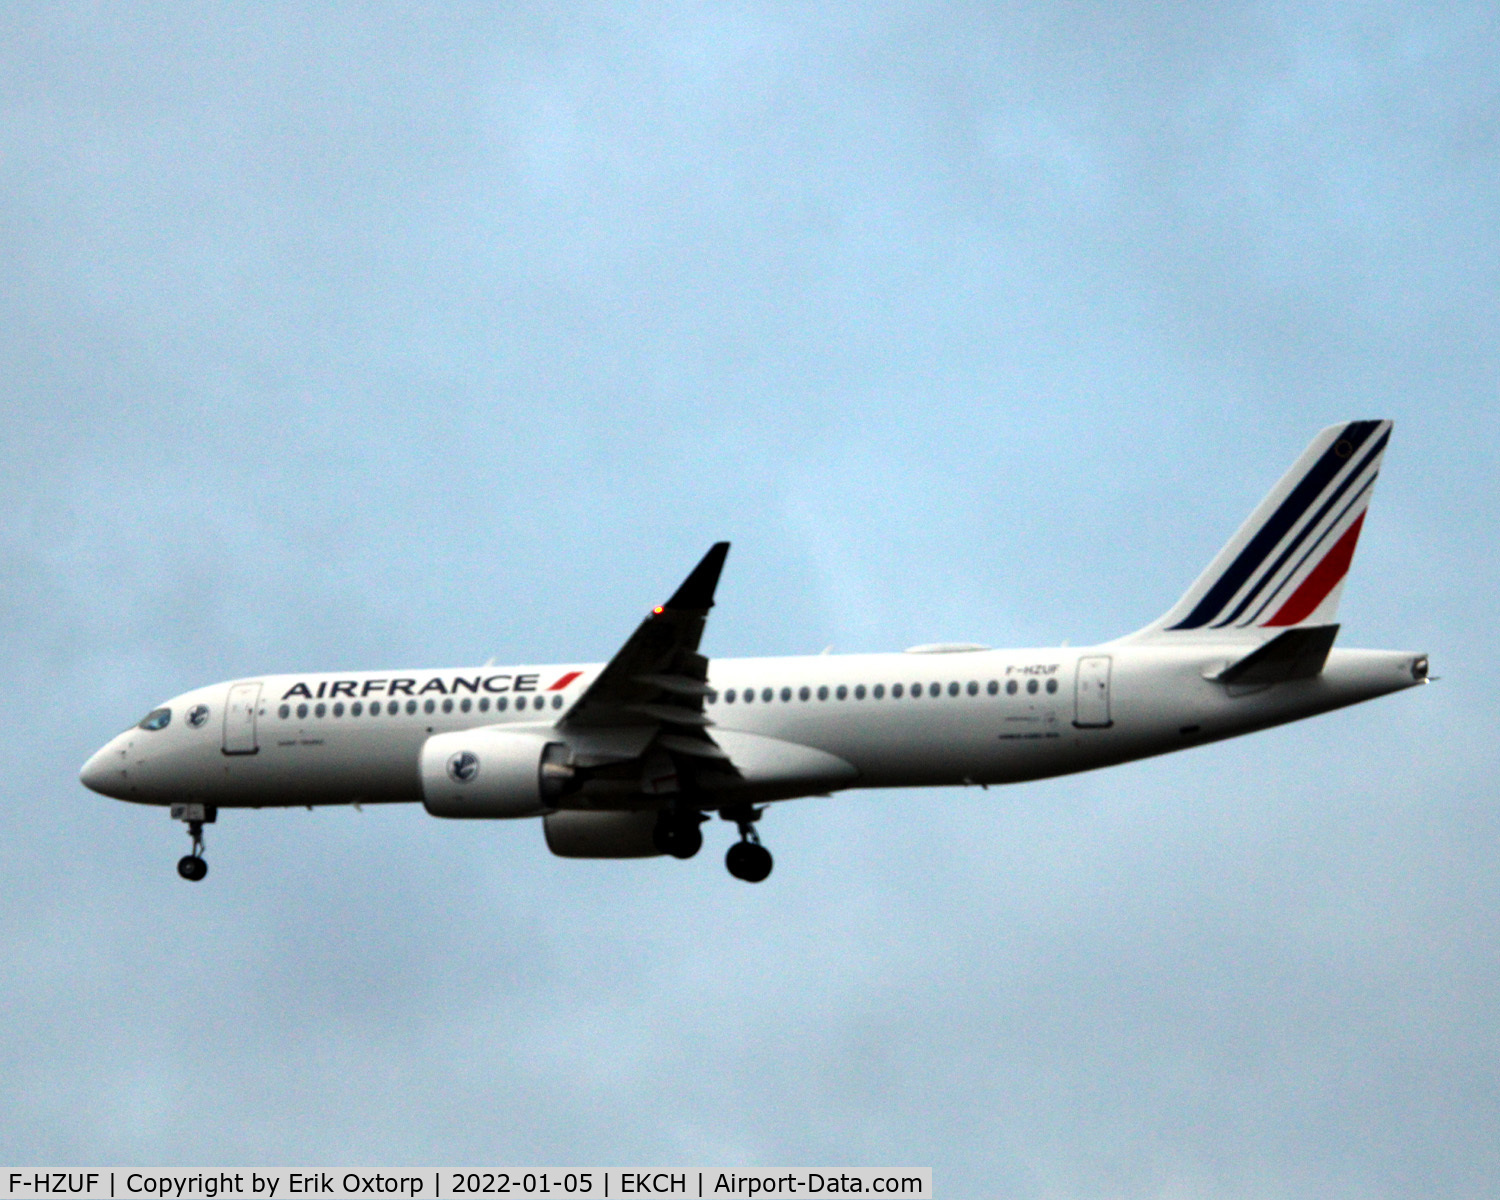 F-HZUF, 2021 Airbus A220-300 C/N 55149, F-HZUF landing rw 22L. First visit of an A220 from Air France